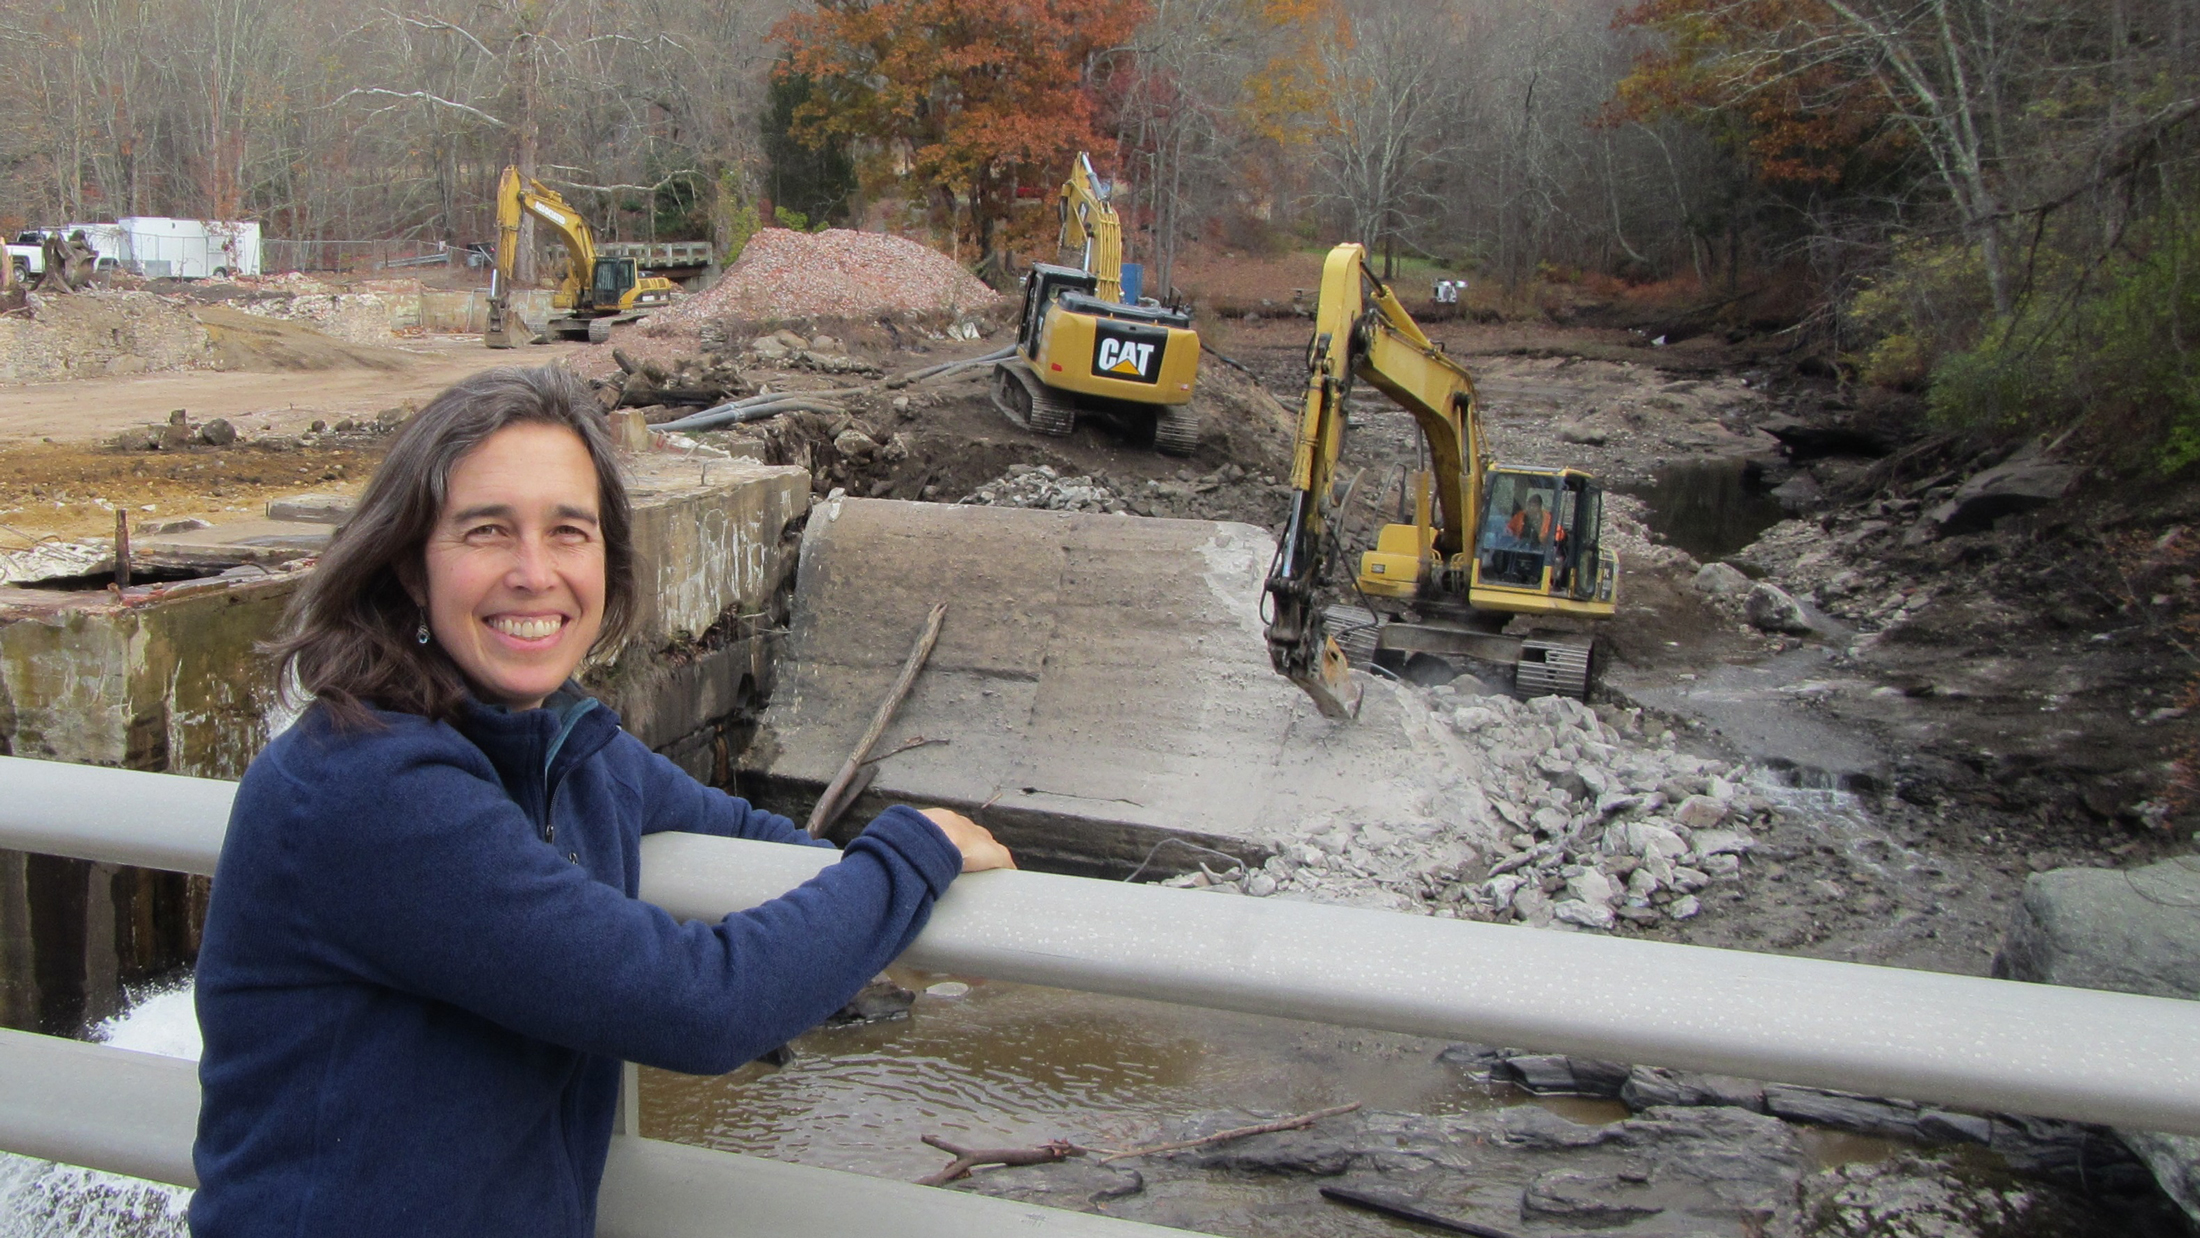 TNC's Sally Harold at the Norton Paper Mill Pond dam, removed last fall on the Jeremy River in Colchester, CT. The Jeremy and the Blackstone come together to form the Salmon River. The removal of this dam (CT’s biggest dam removal to date) opened up 17 miles of high-quality habitat upstream. Photo © Steve Gephard